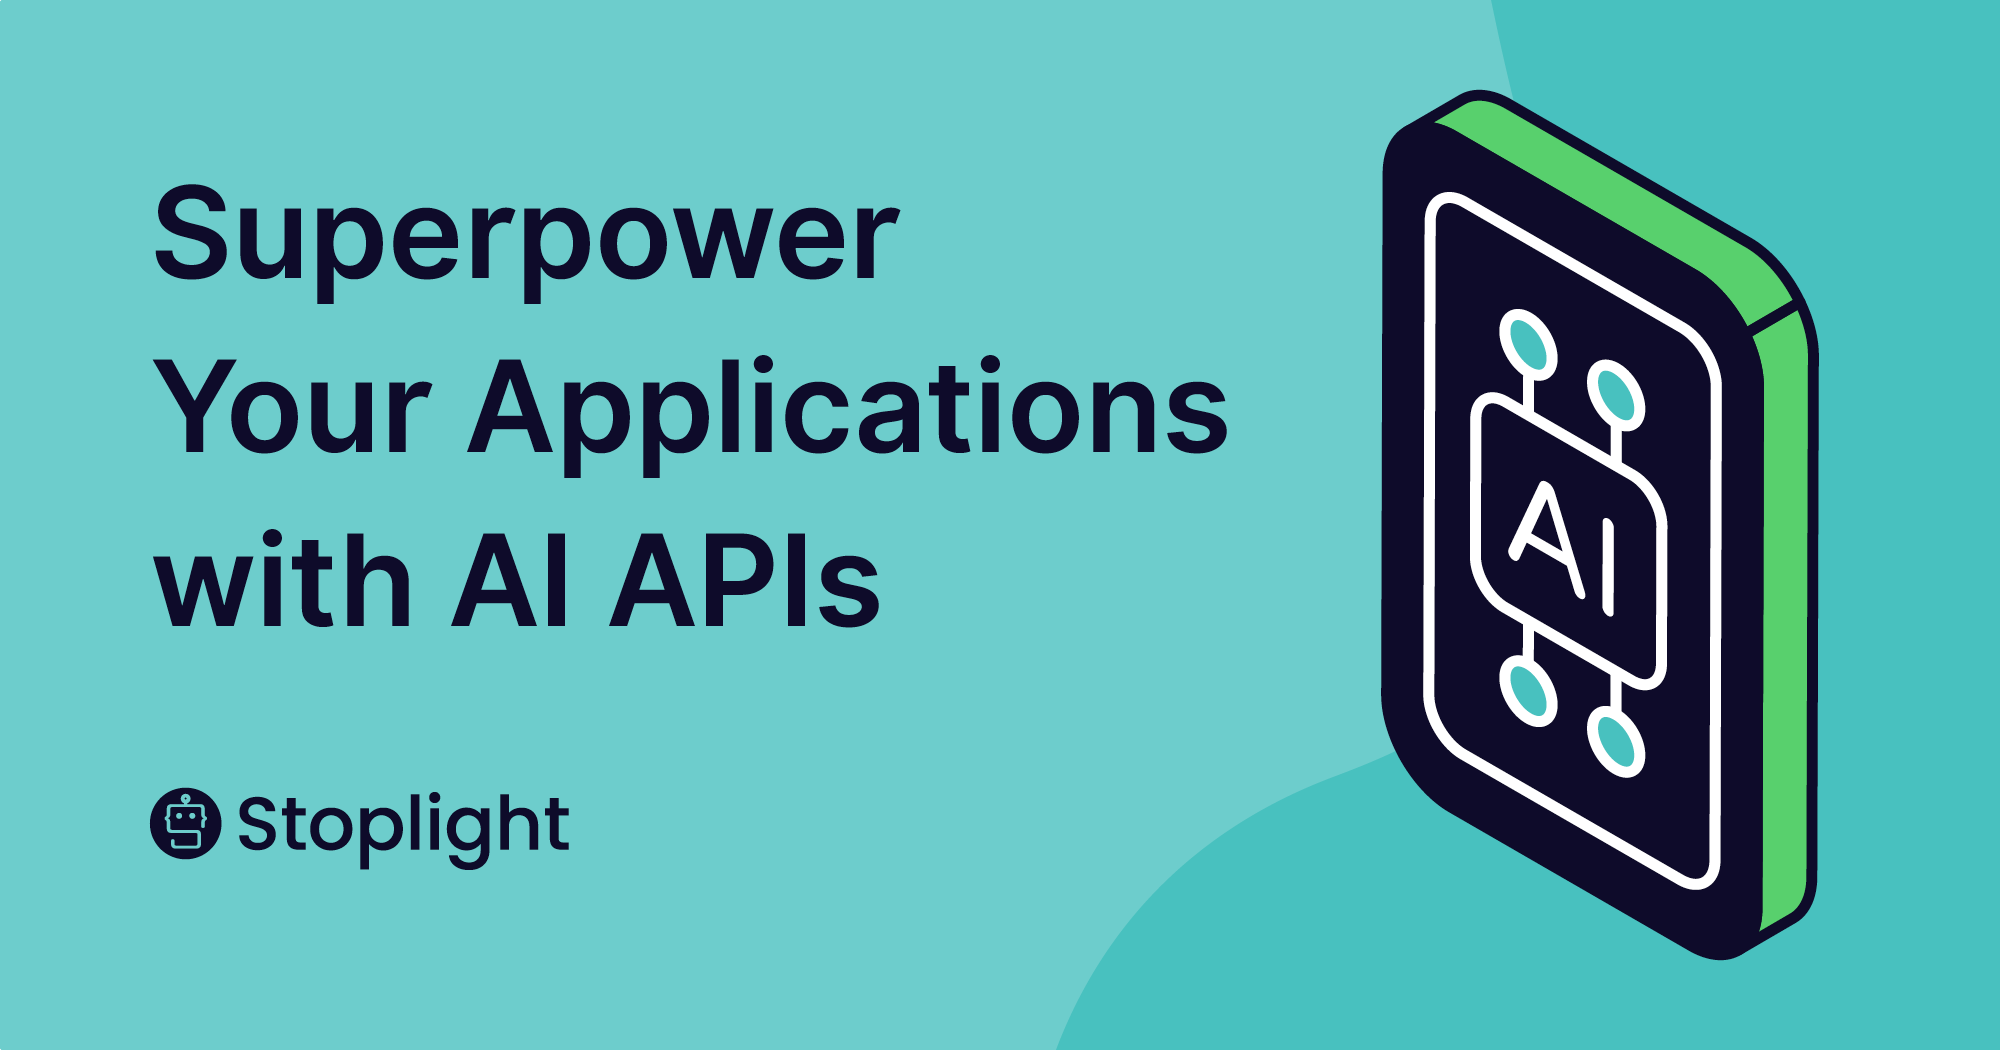 Superpower Your Applications with AI APIs